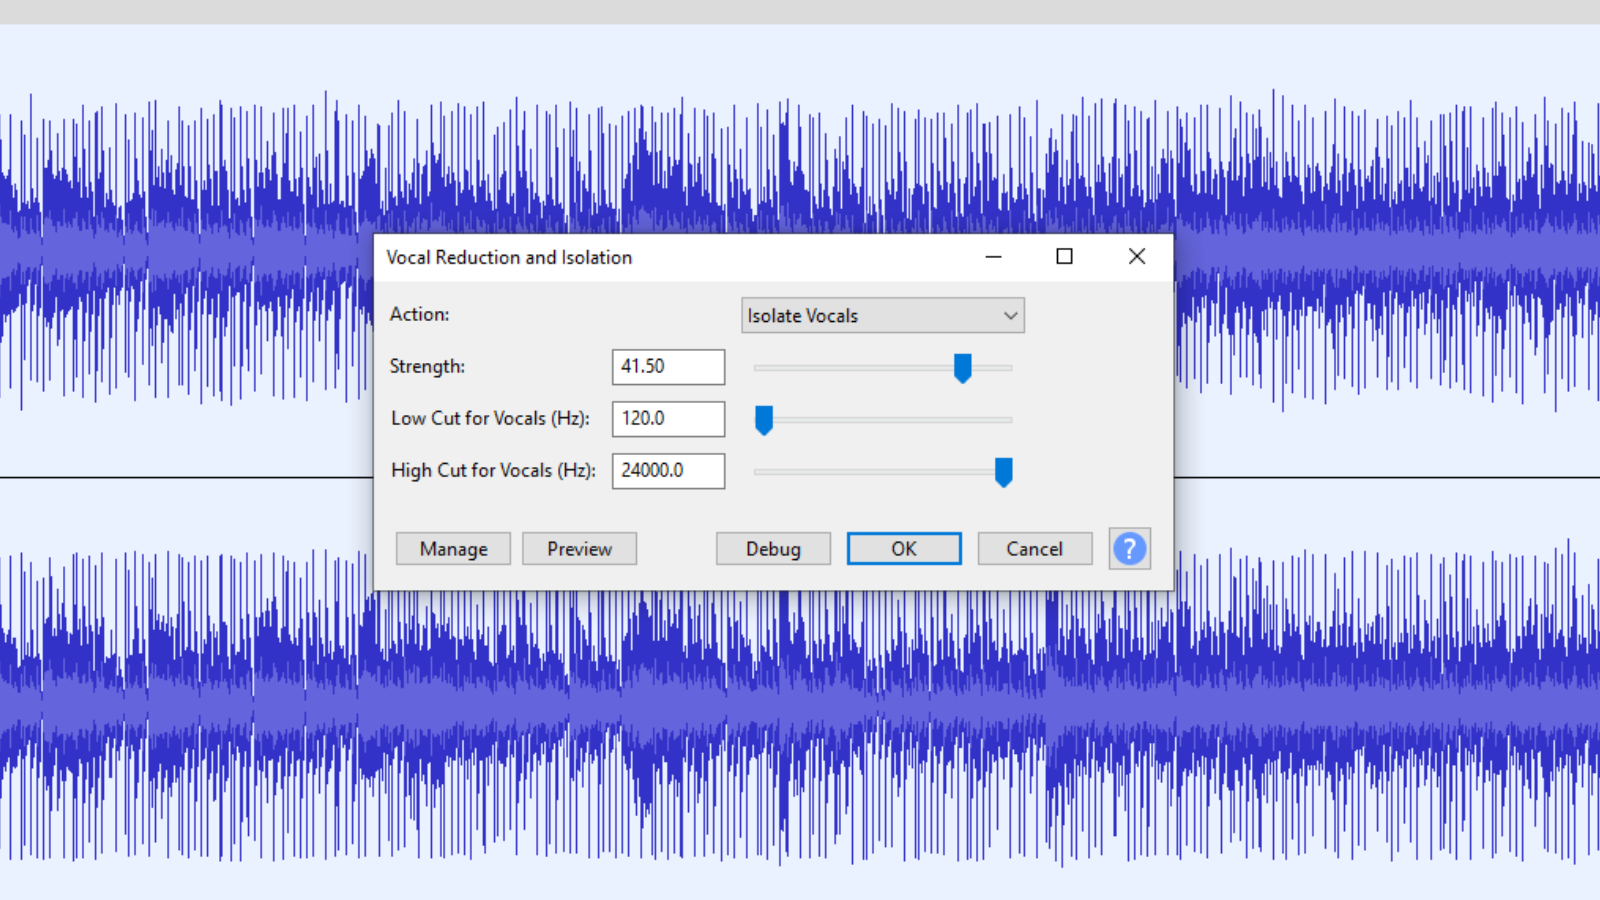 vocal reduction and isolation pop up audacity